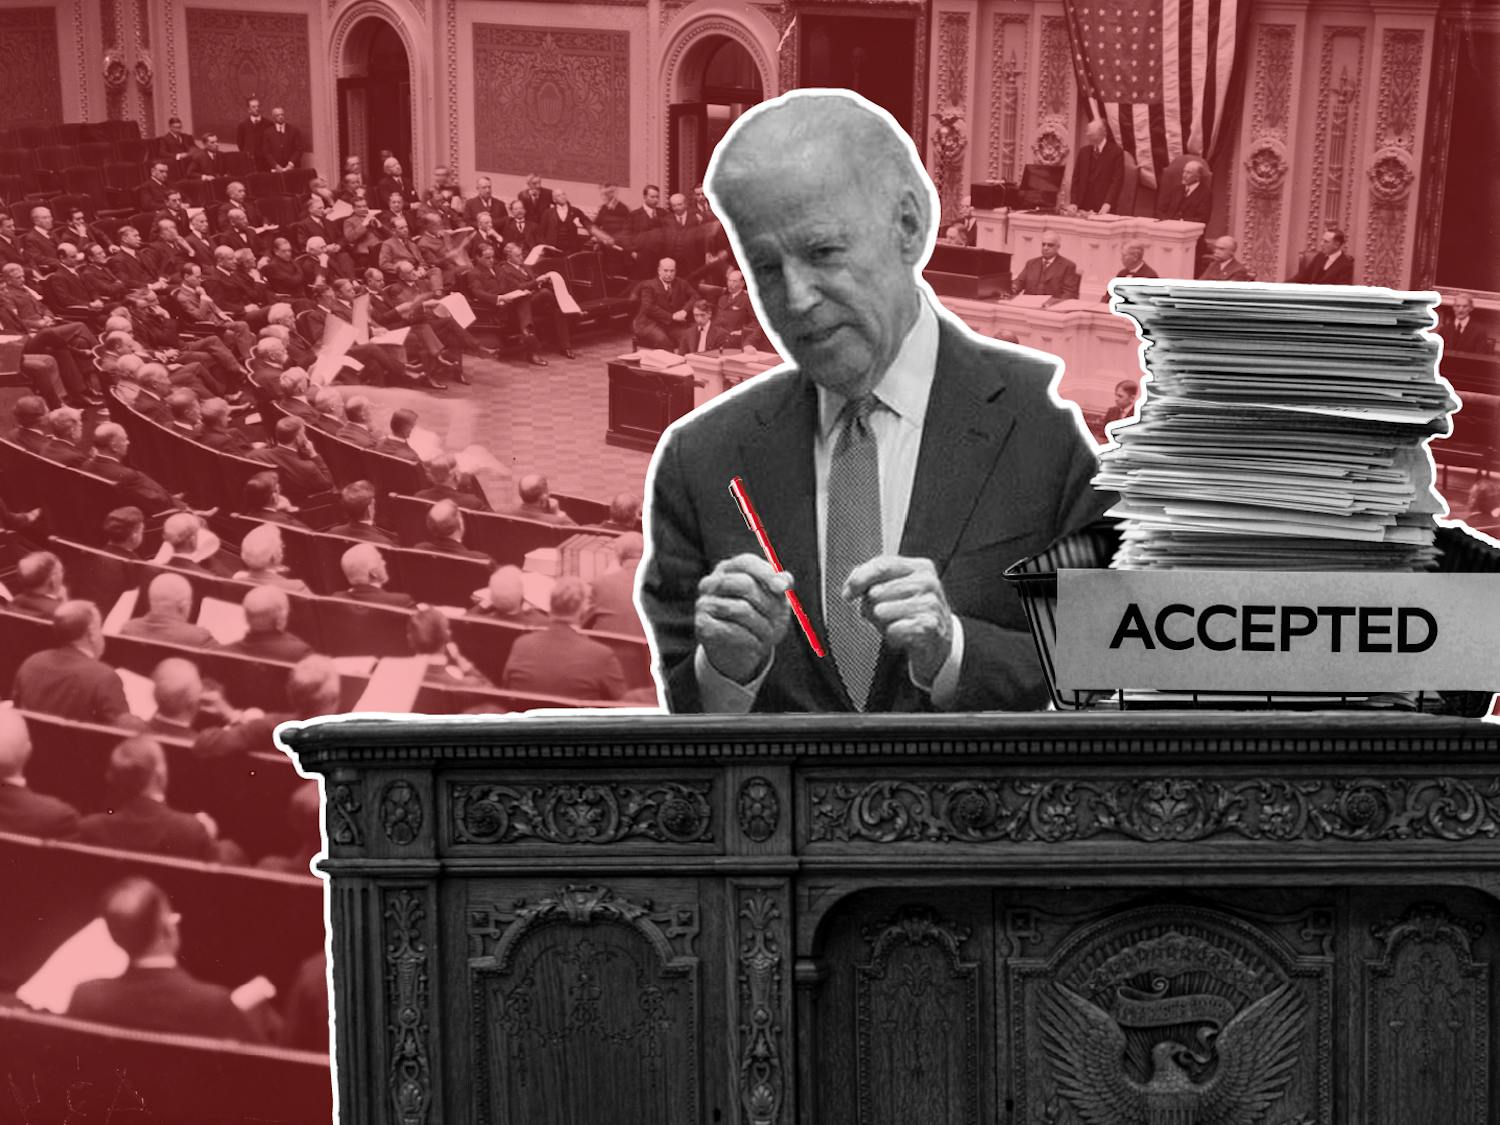 President Biden is ready to sign what Congress reluctantly delivers.